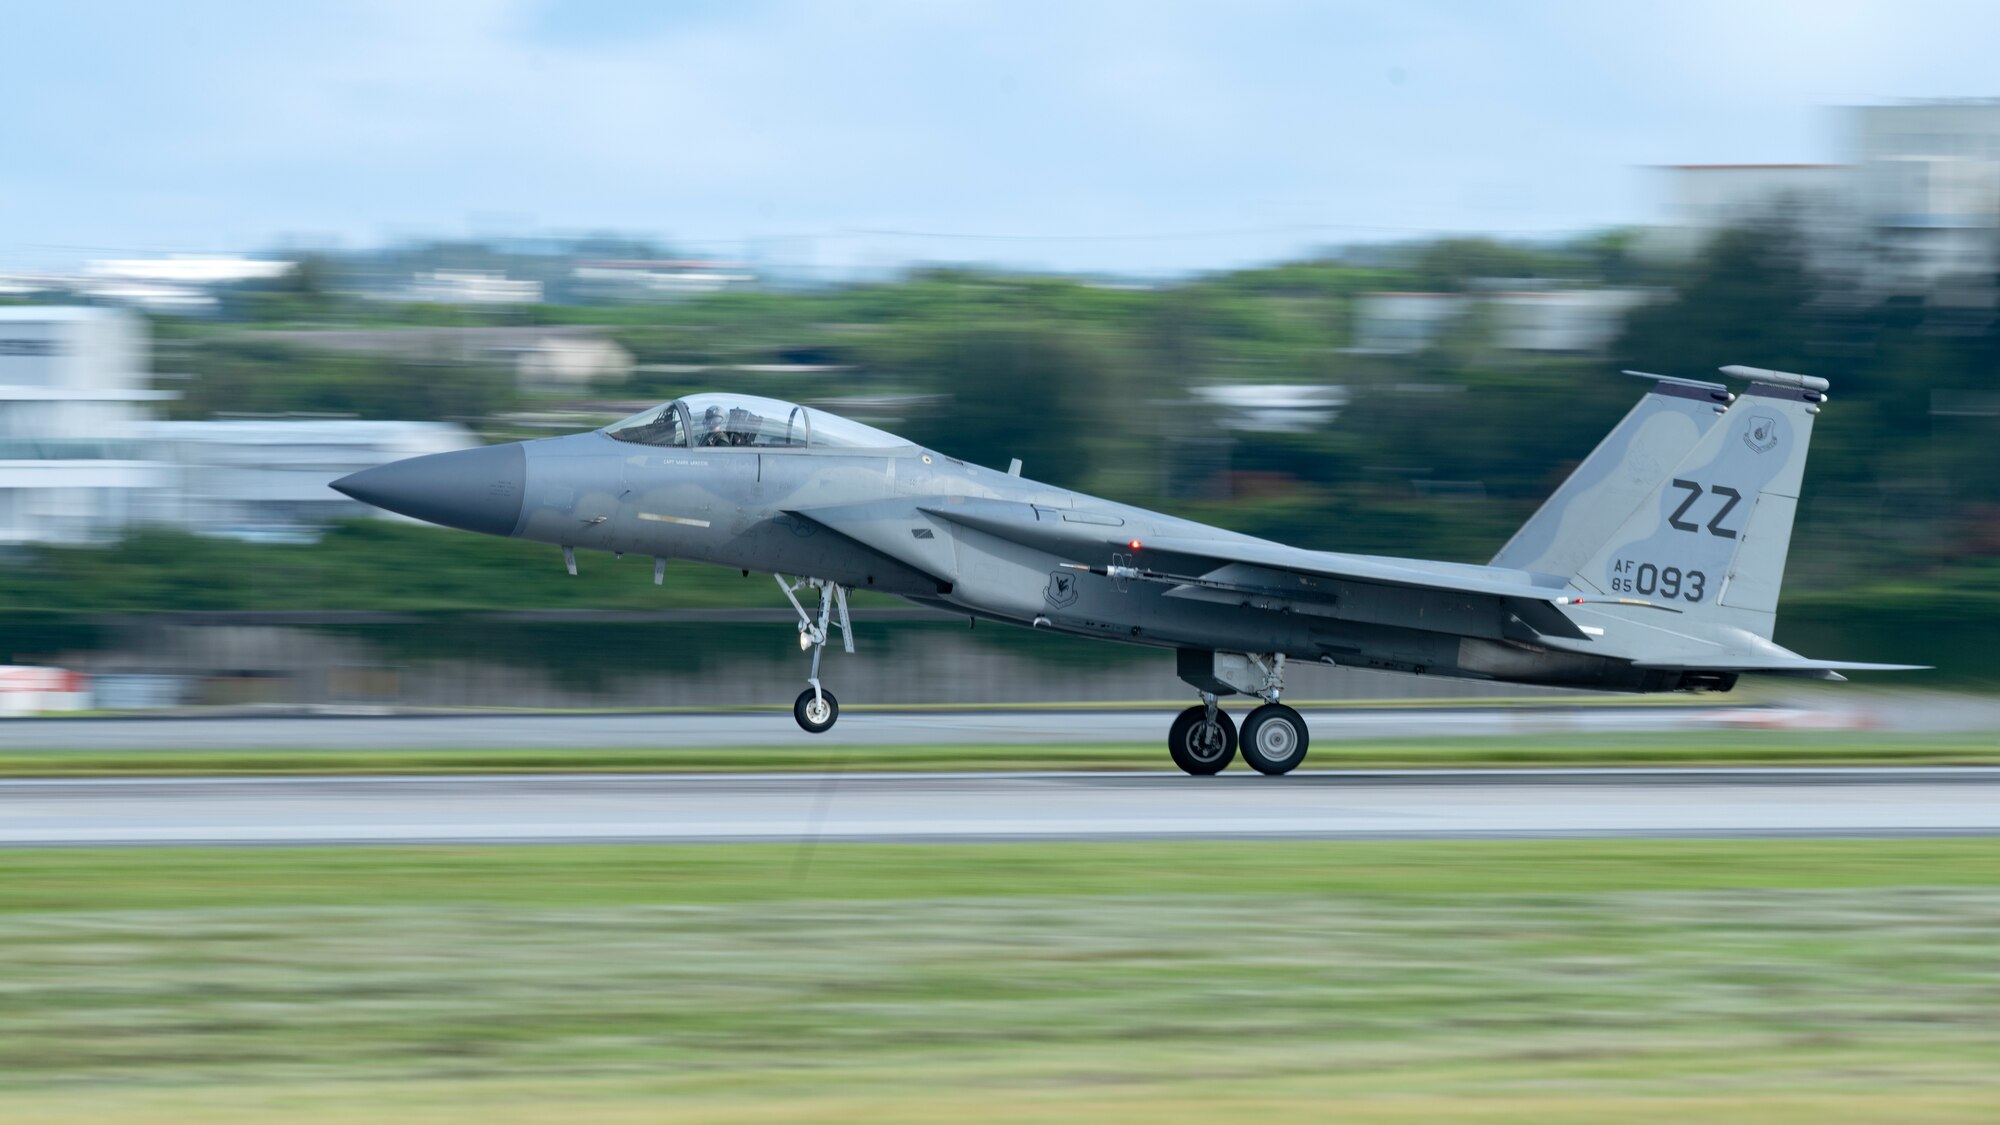 An F-15C Eagle assigned to the 44th Fighter Squadron lands after a training sortie in support of surge operations at Kadena Air Base, Japan, Aug. 24, 2022. During the surge, the 44th FS flew up to 40 sorties a day, honing air-to-air tactics and advanced combat maneuvers, and strengthening the readiness capabilities needed to ensure a free and open Indo-Pacific. (U.S. Air Force photo by Senior Airman Jessi Roth)